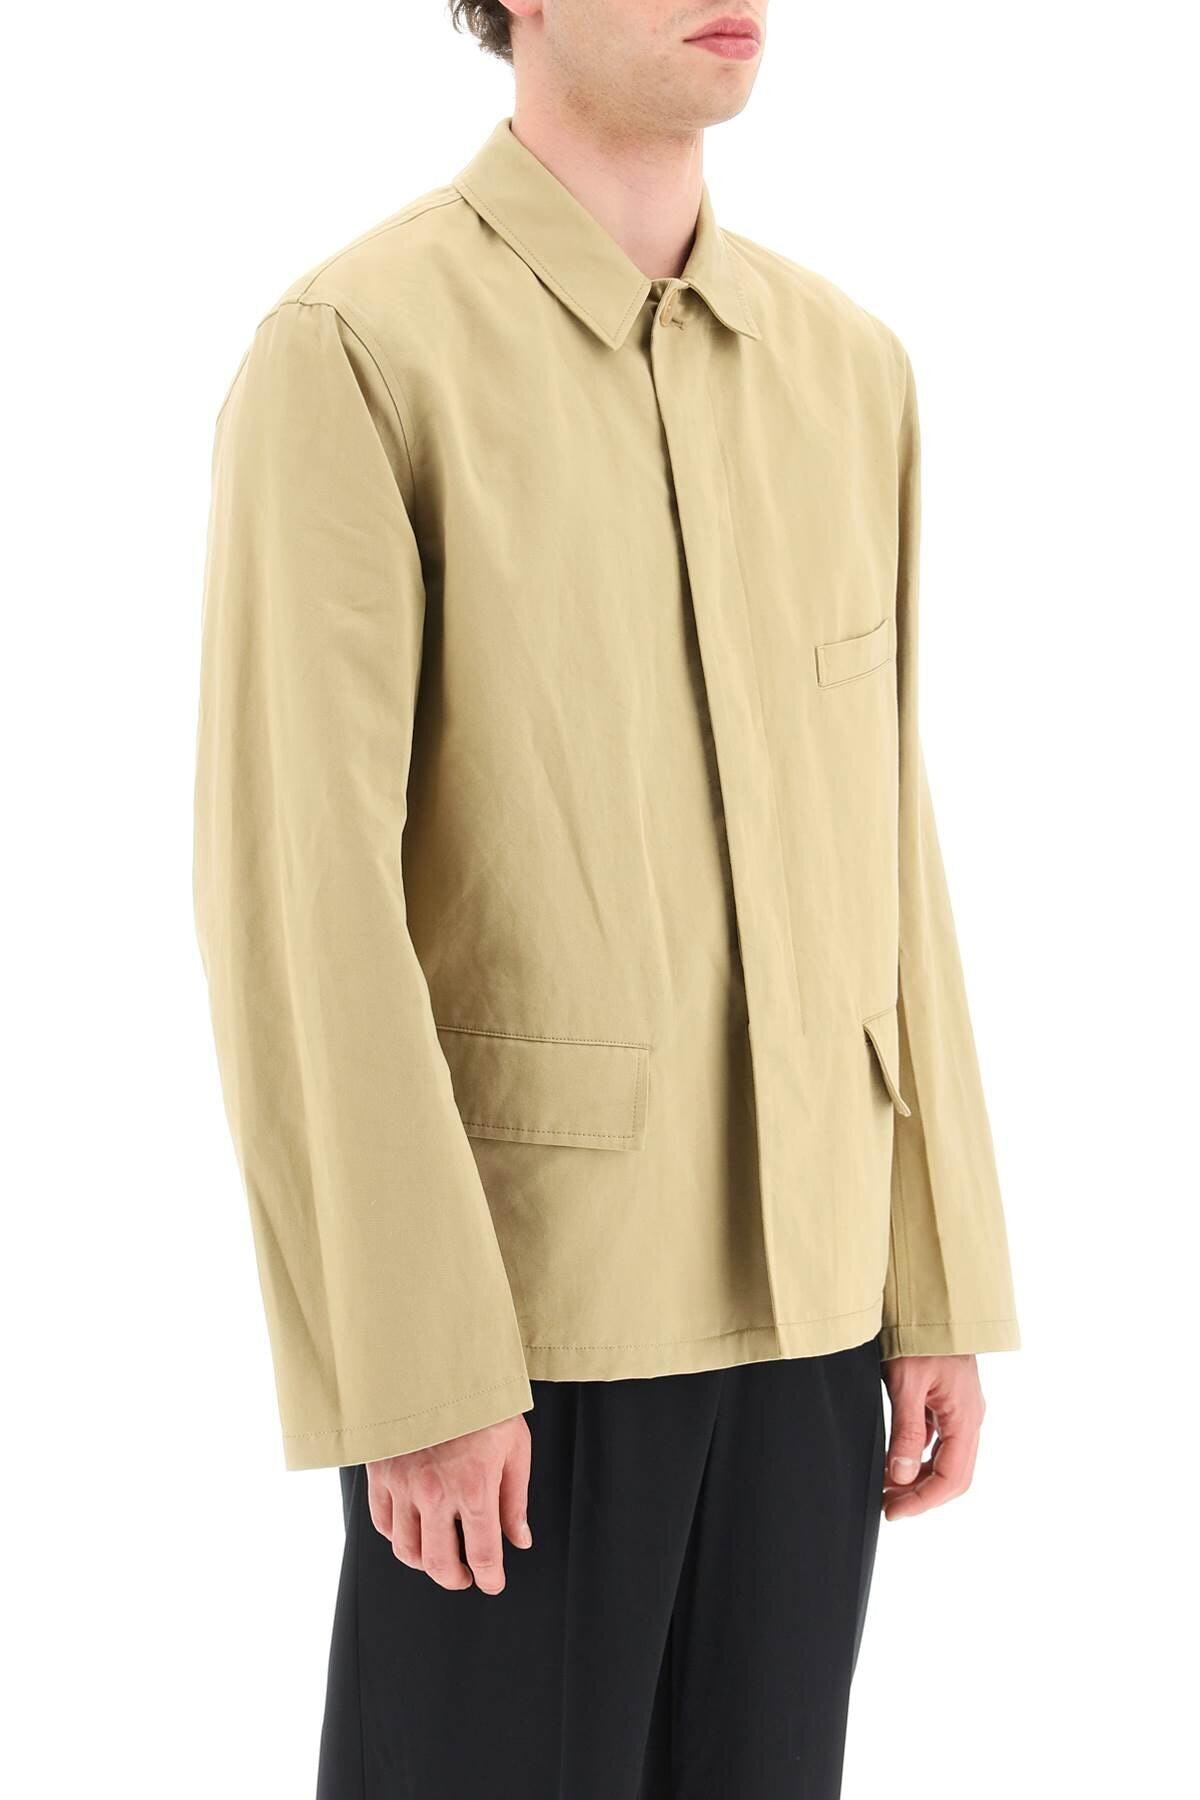 Lemaire 'workwear' Jacket in Natural for Men | Lyst